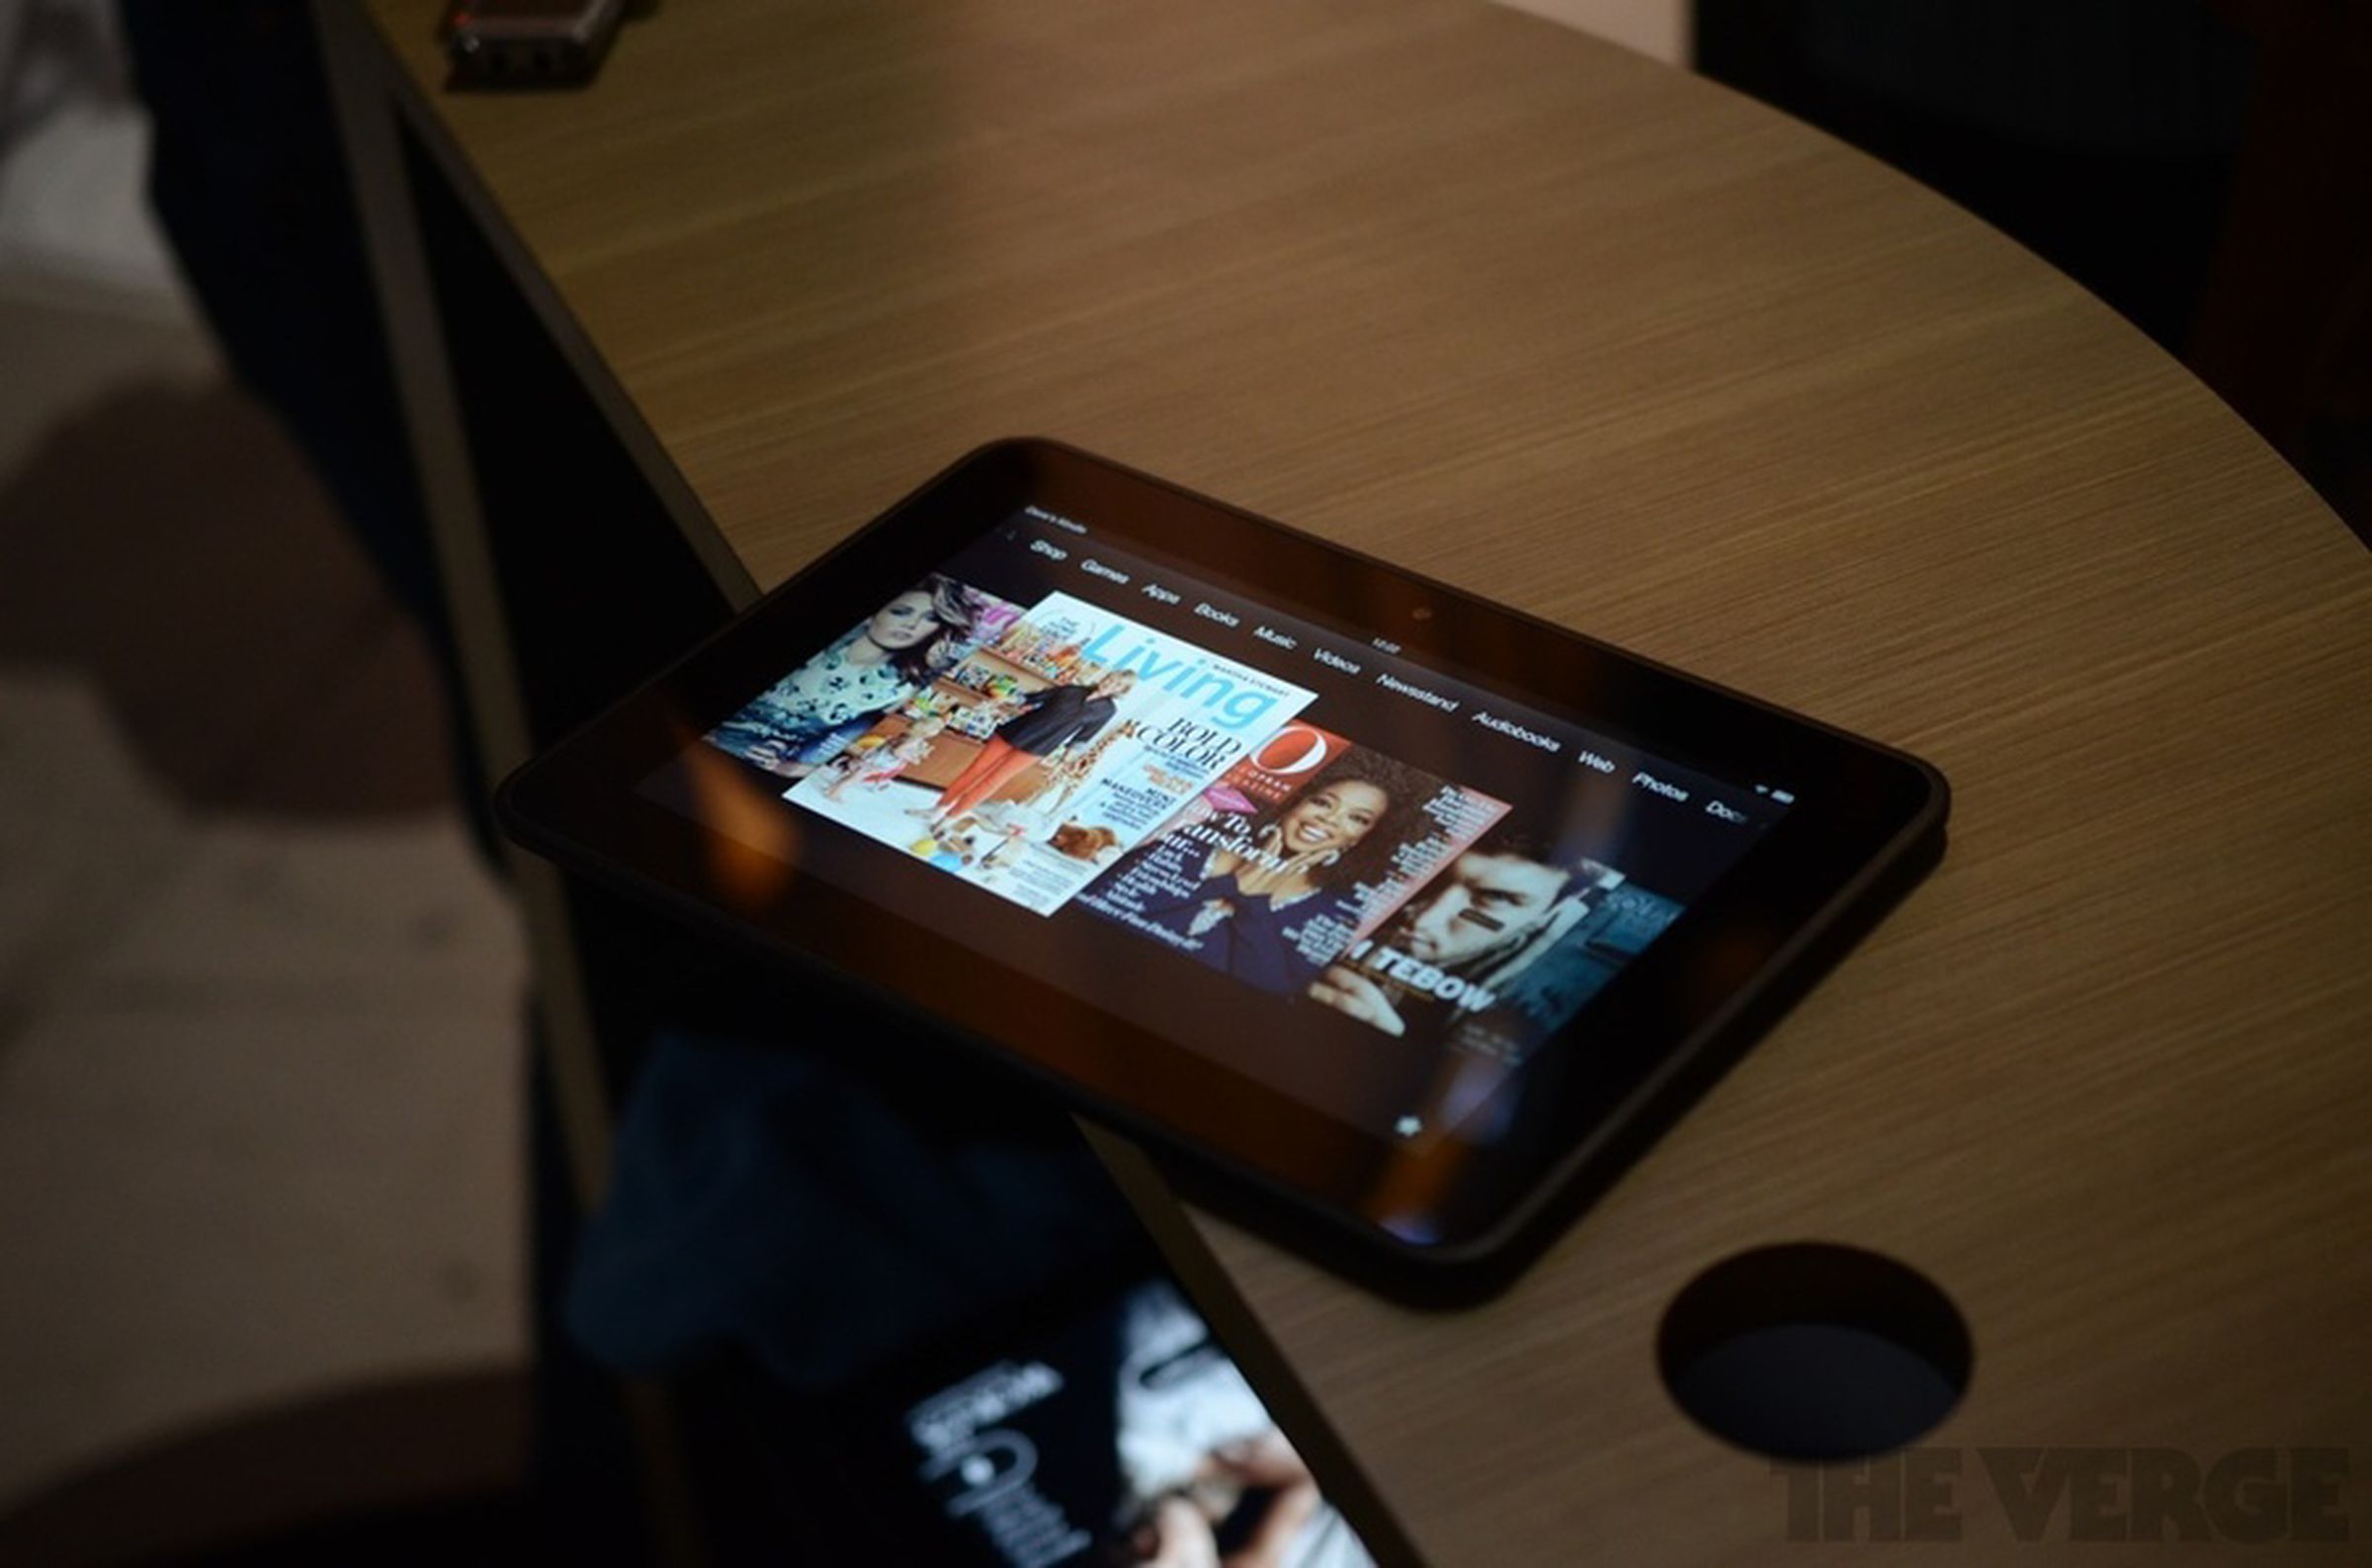 Amazon 8.9-inch Kindle Fire HD hands-on pictures